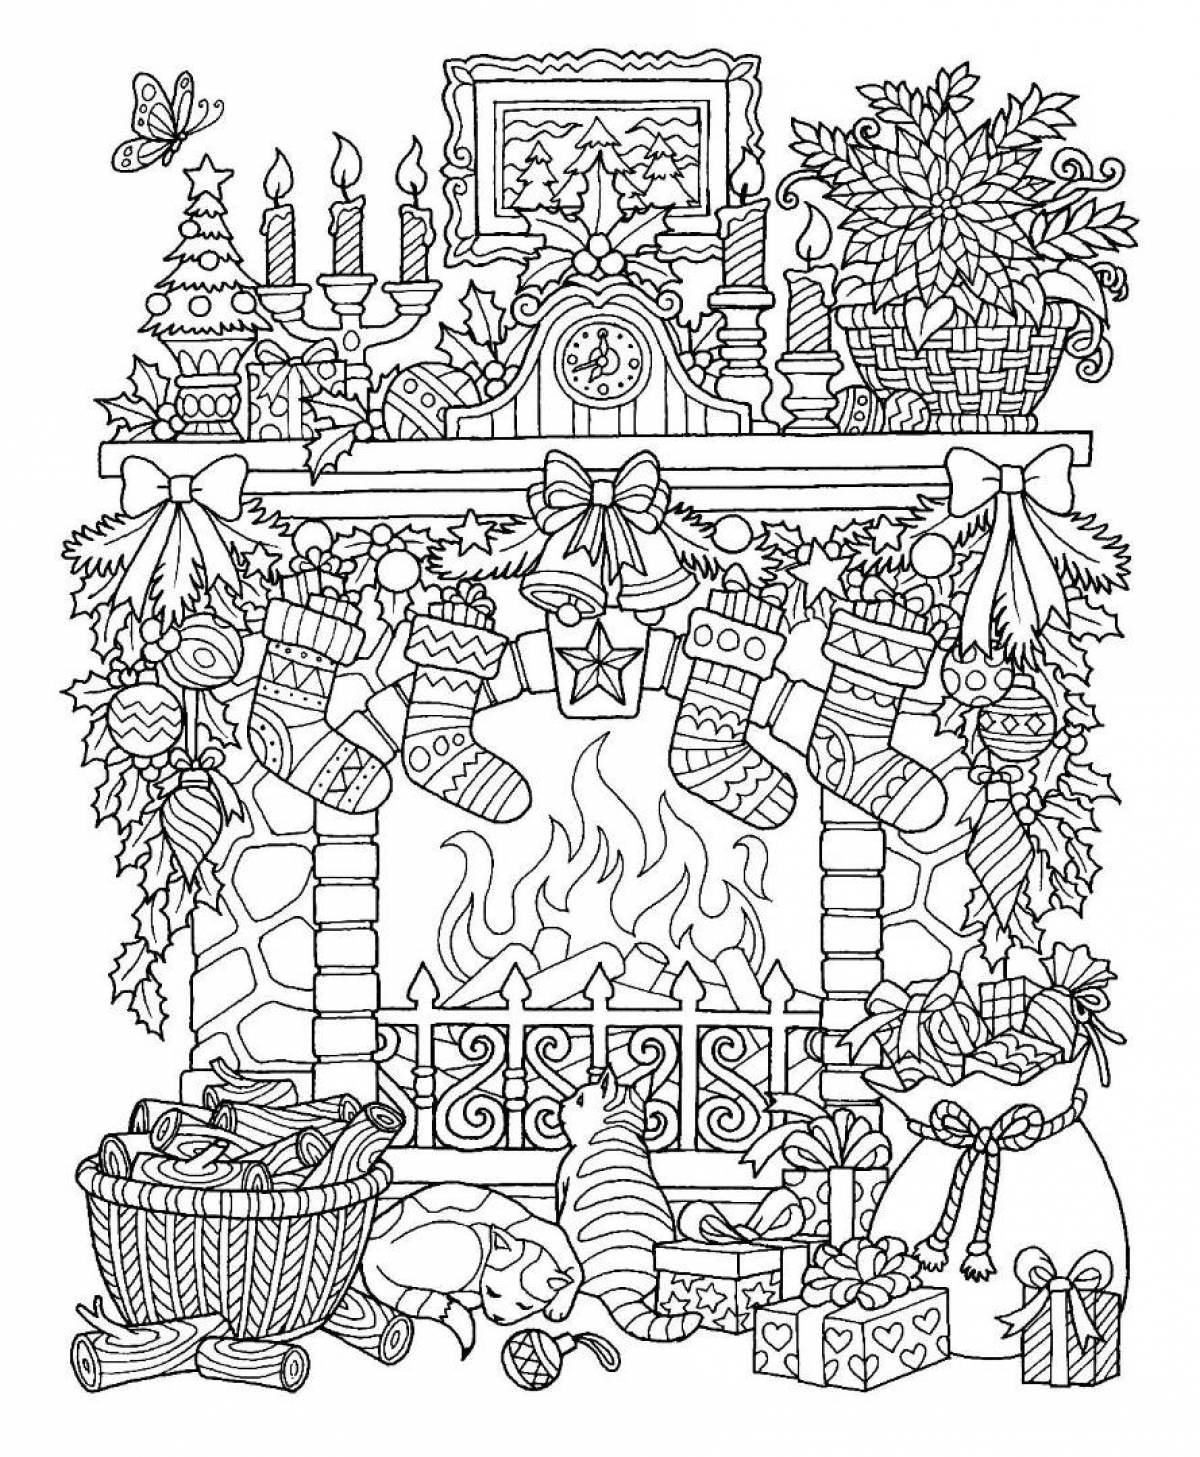 Awesome Christmas coloring pages